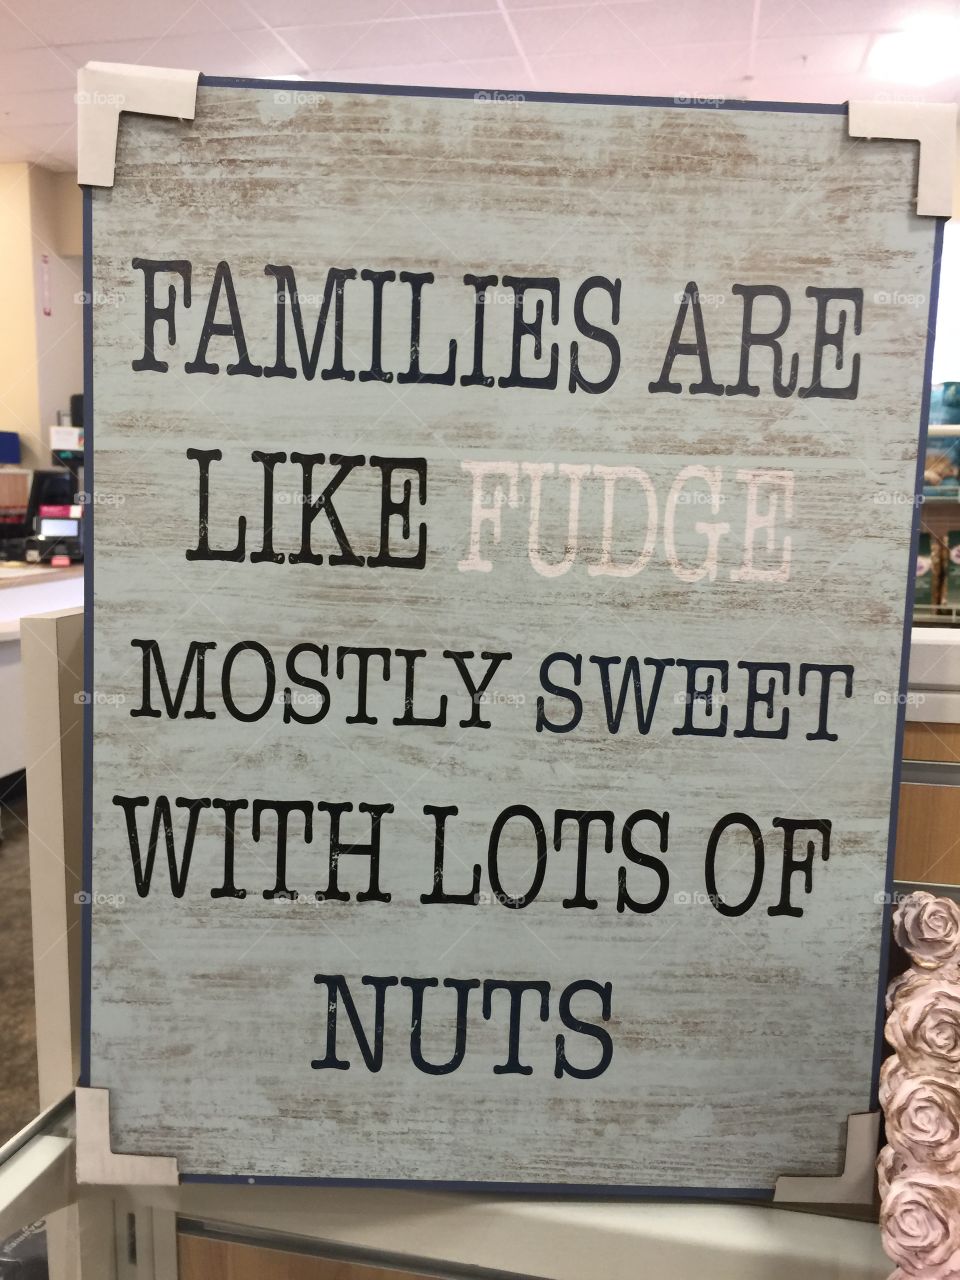 Inspirational sign that promotes family